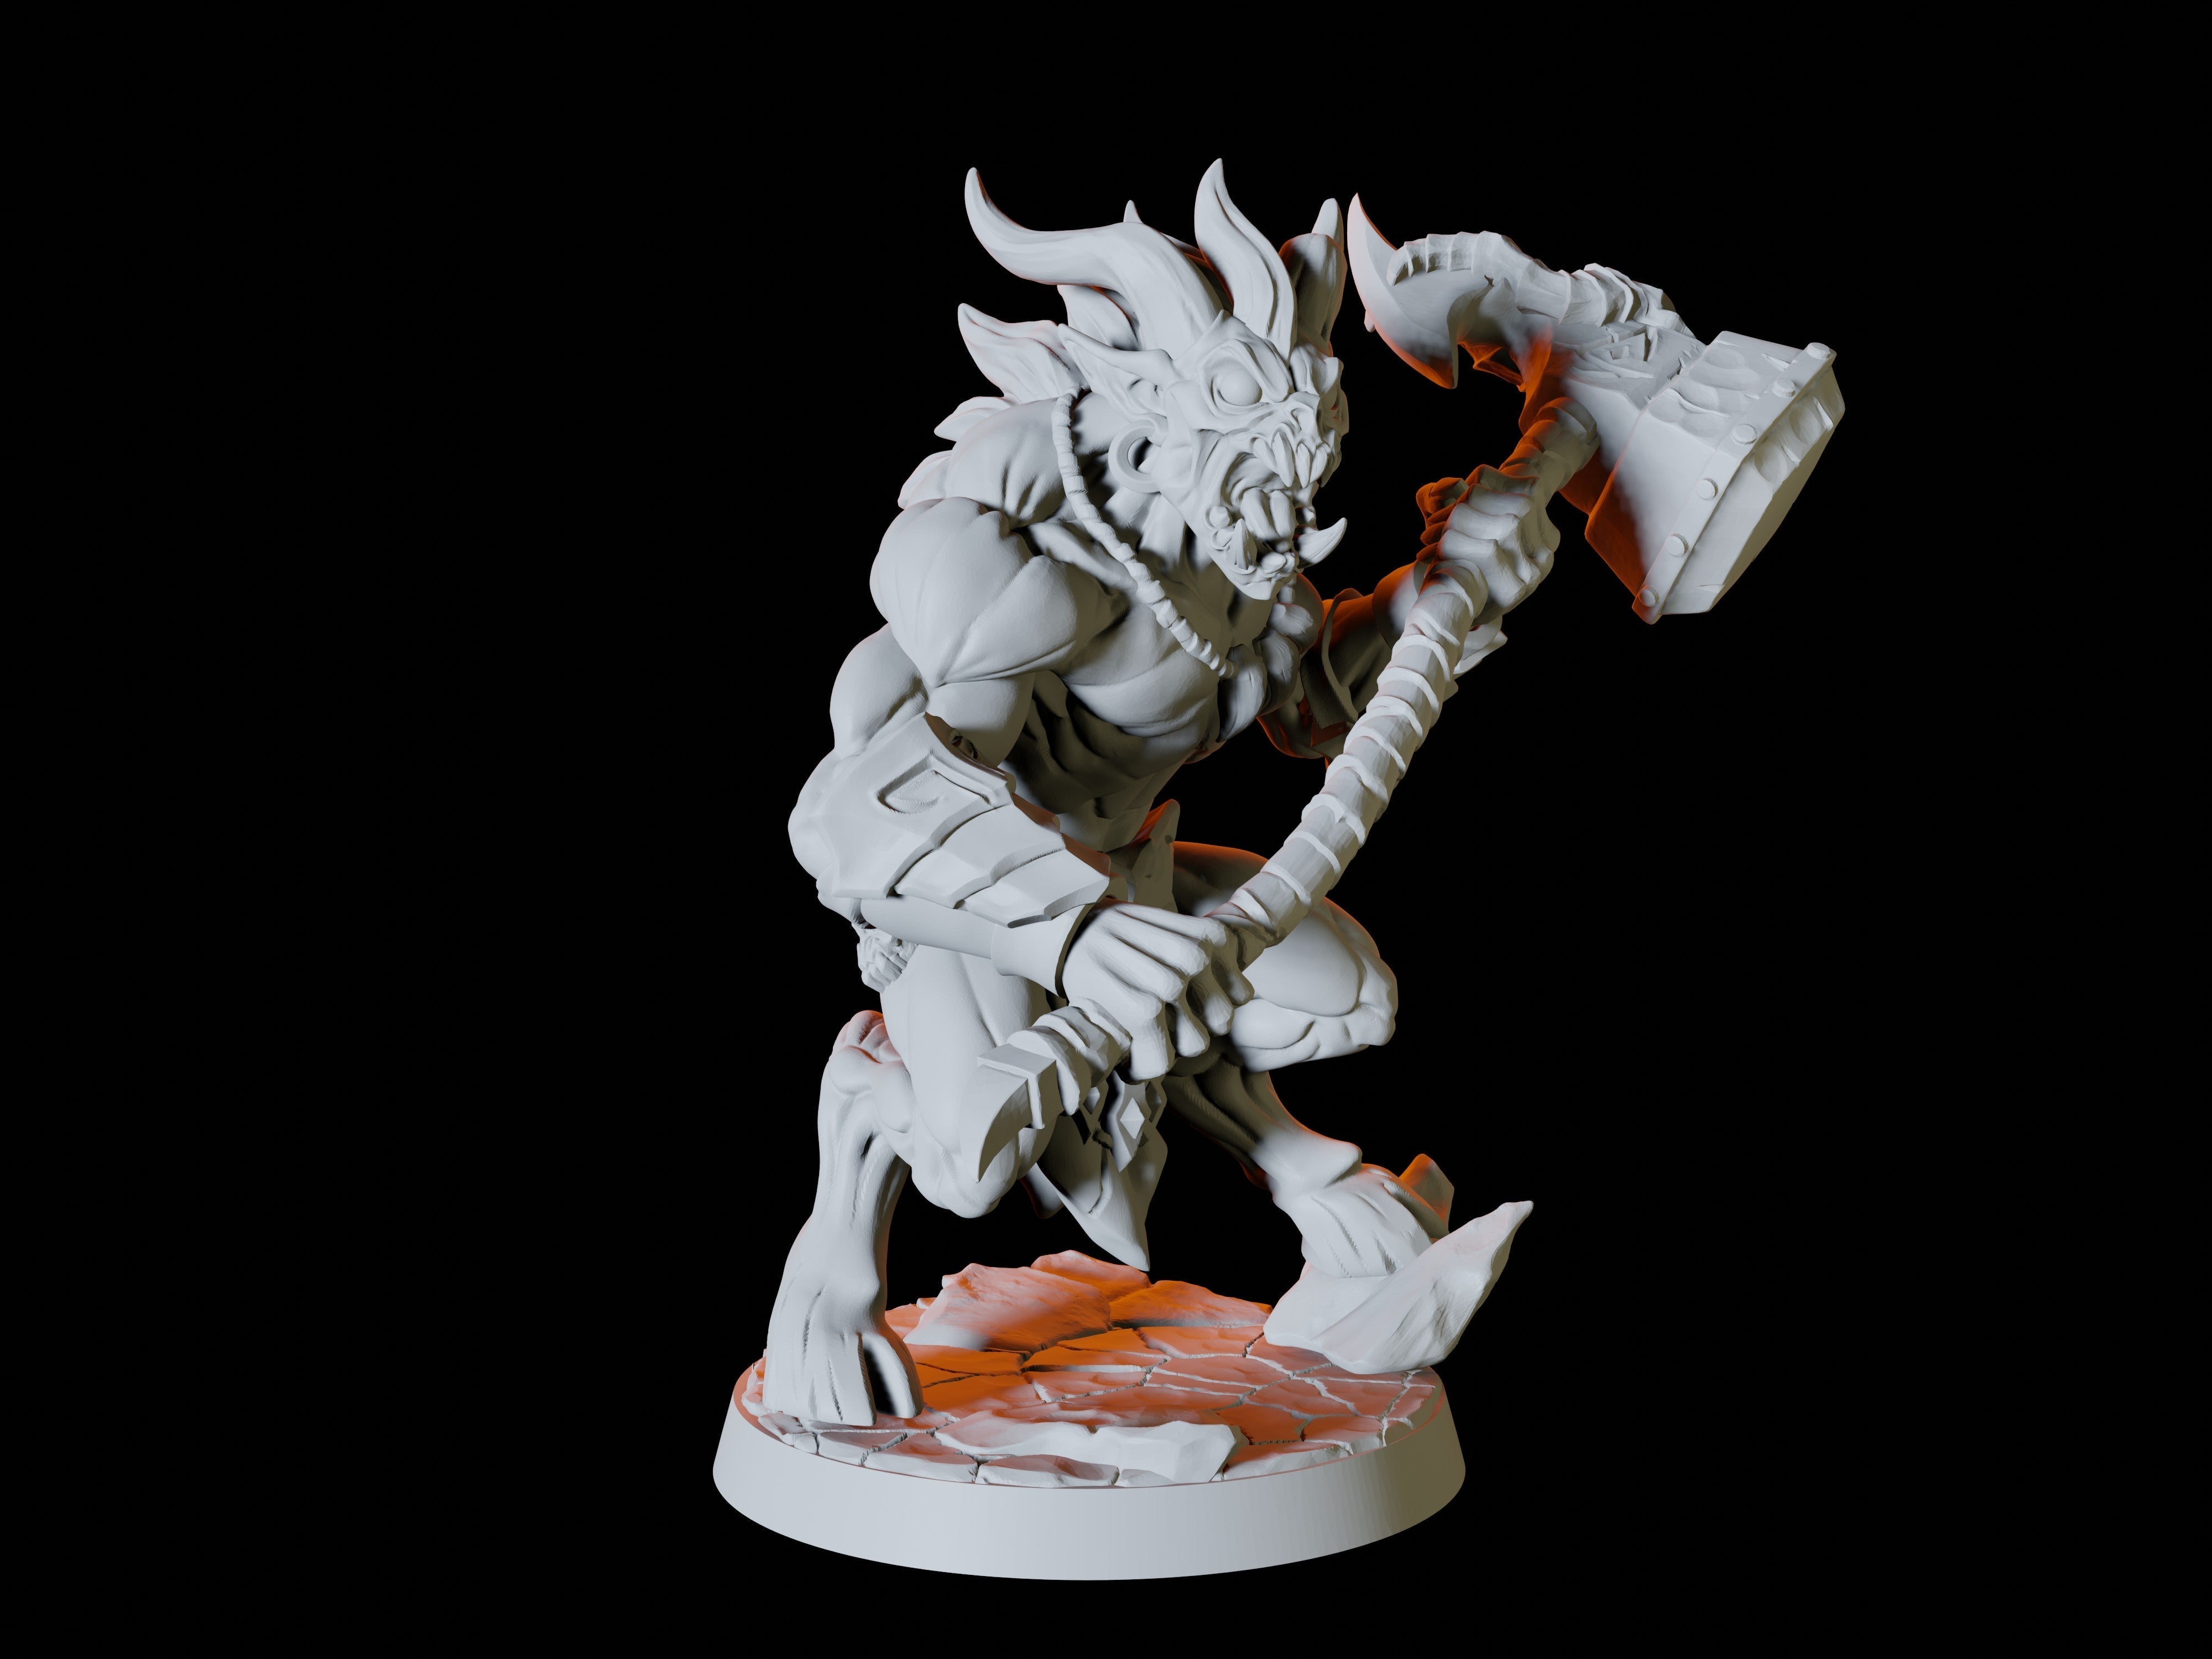 Two Demonic Warrior Miniatures for Dungeons and Dragons - Myth Forged